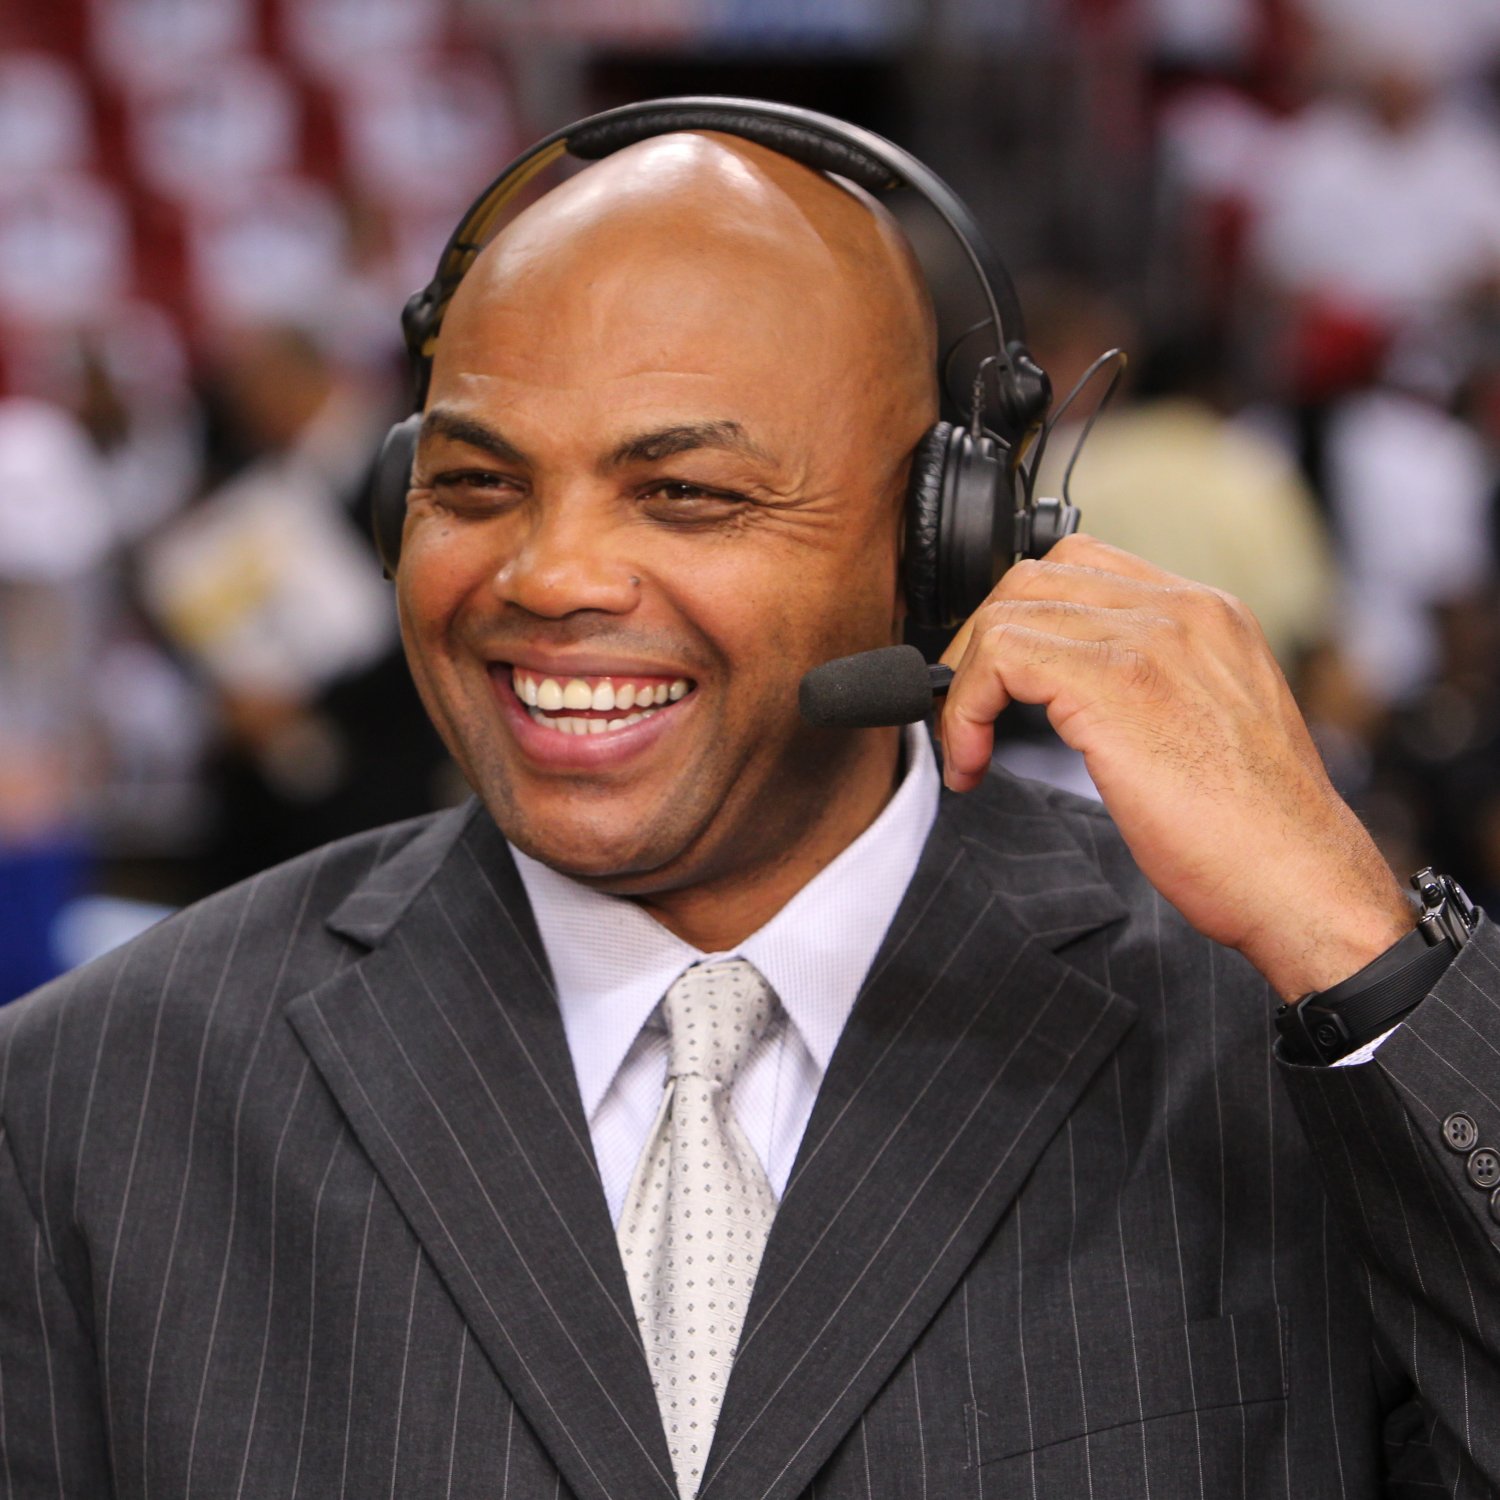 Charles Barkley - "Listening to a woman is almost as bad as losing to one. There are only three things that women are better at than men: cleaning, cooking, and having sex."